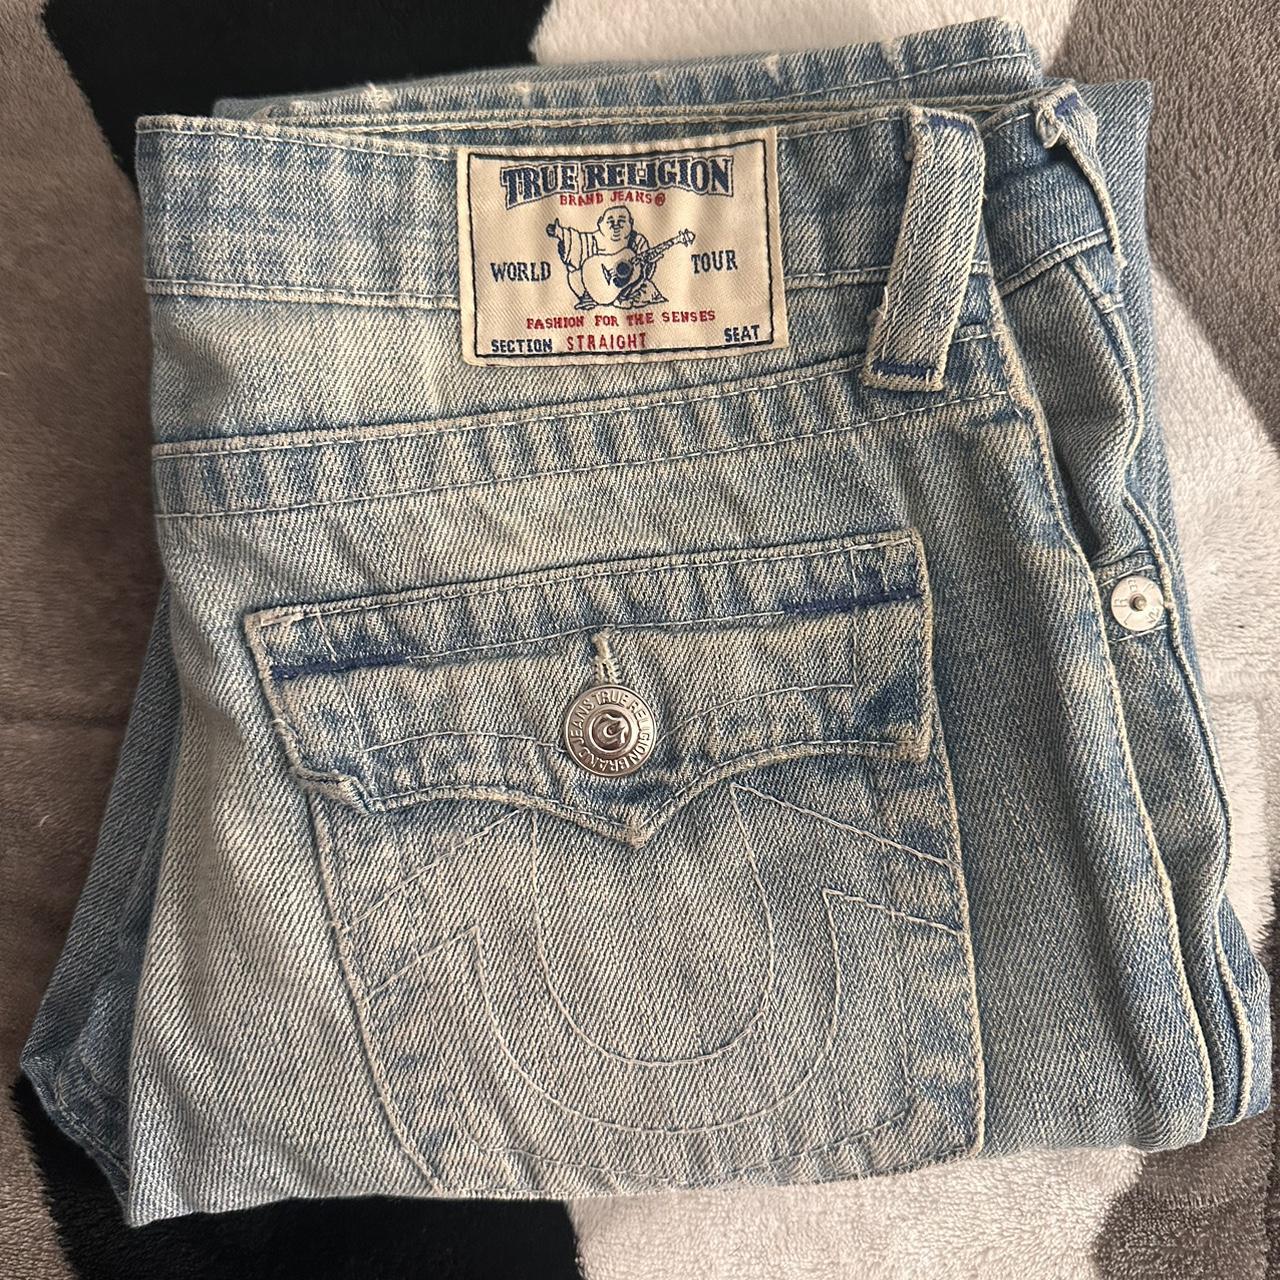 True Religion jeans Kids size 16 Will fit if you... - Depop